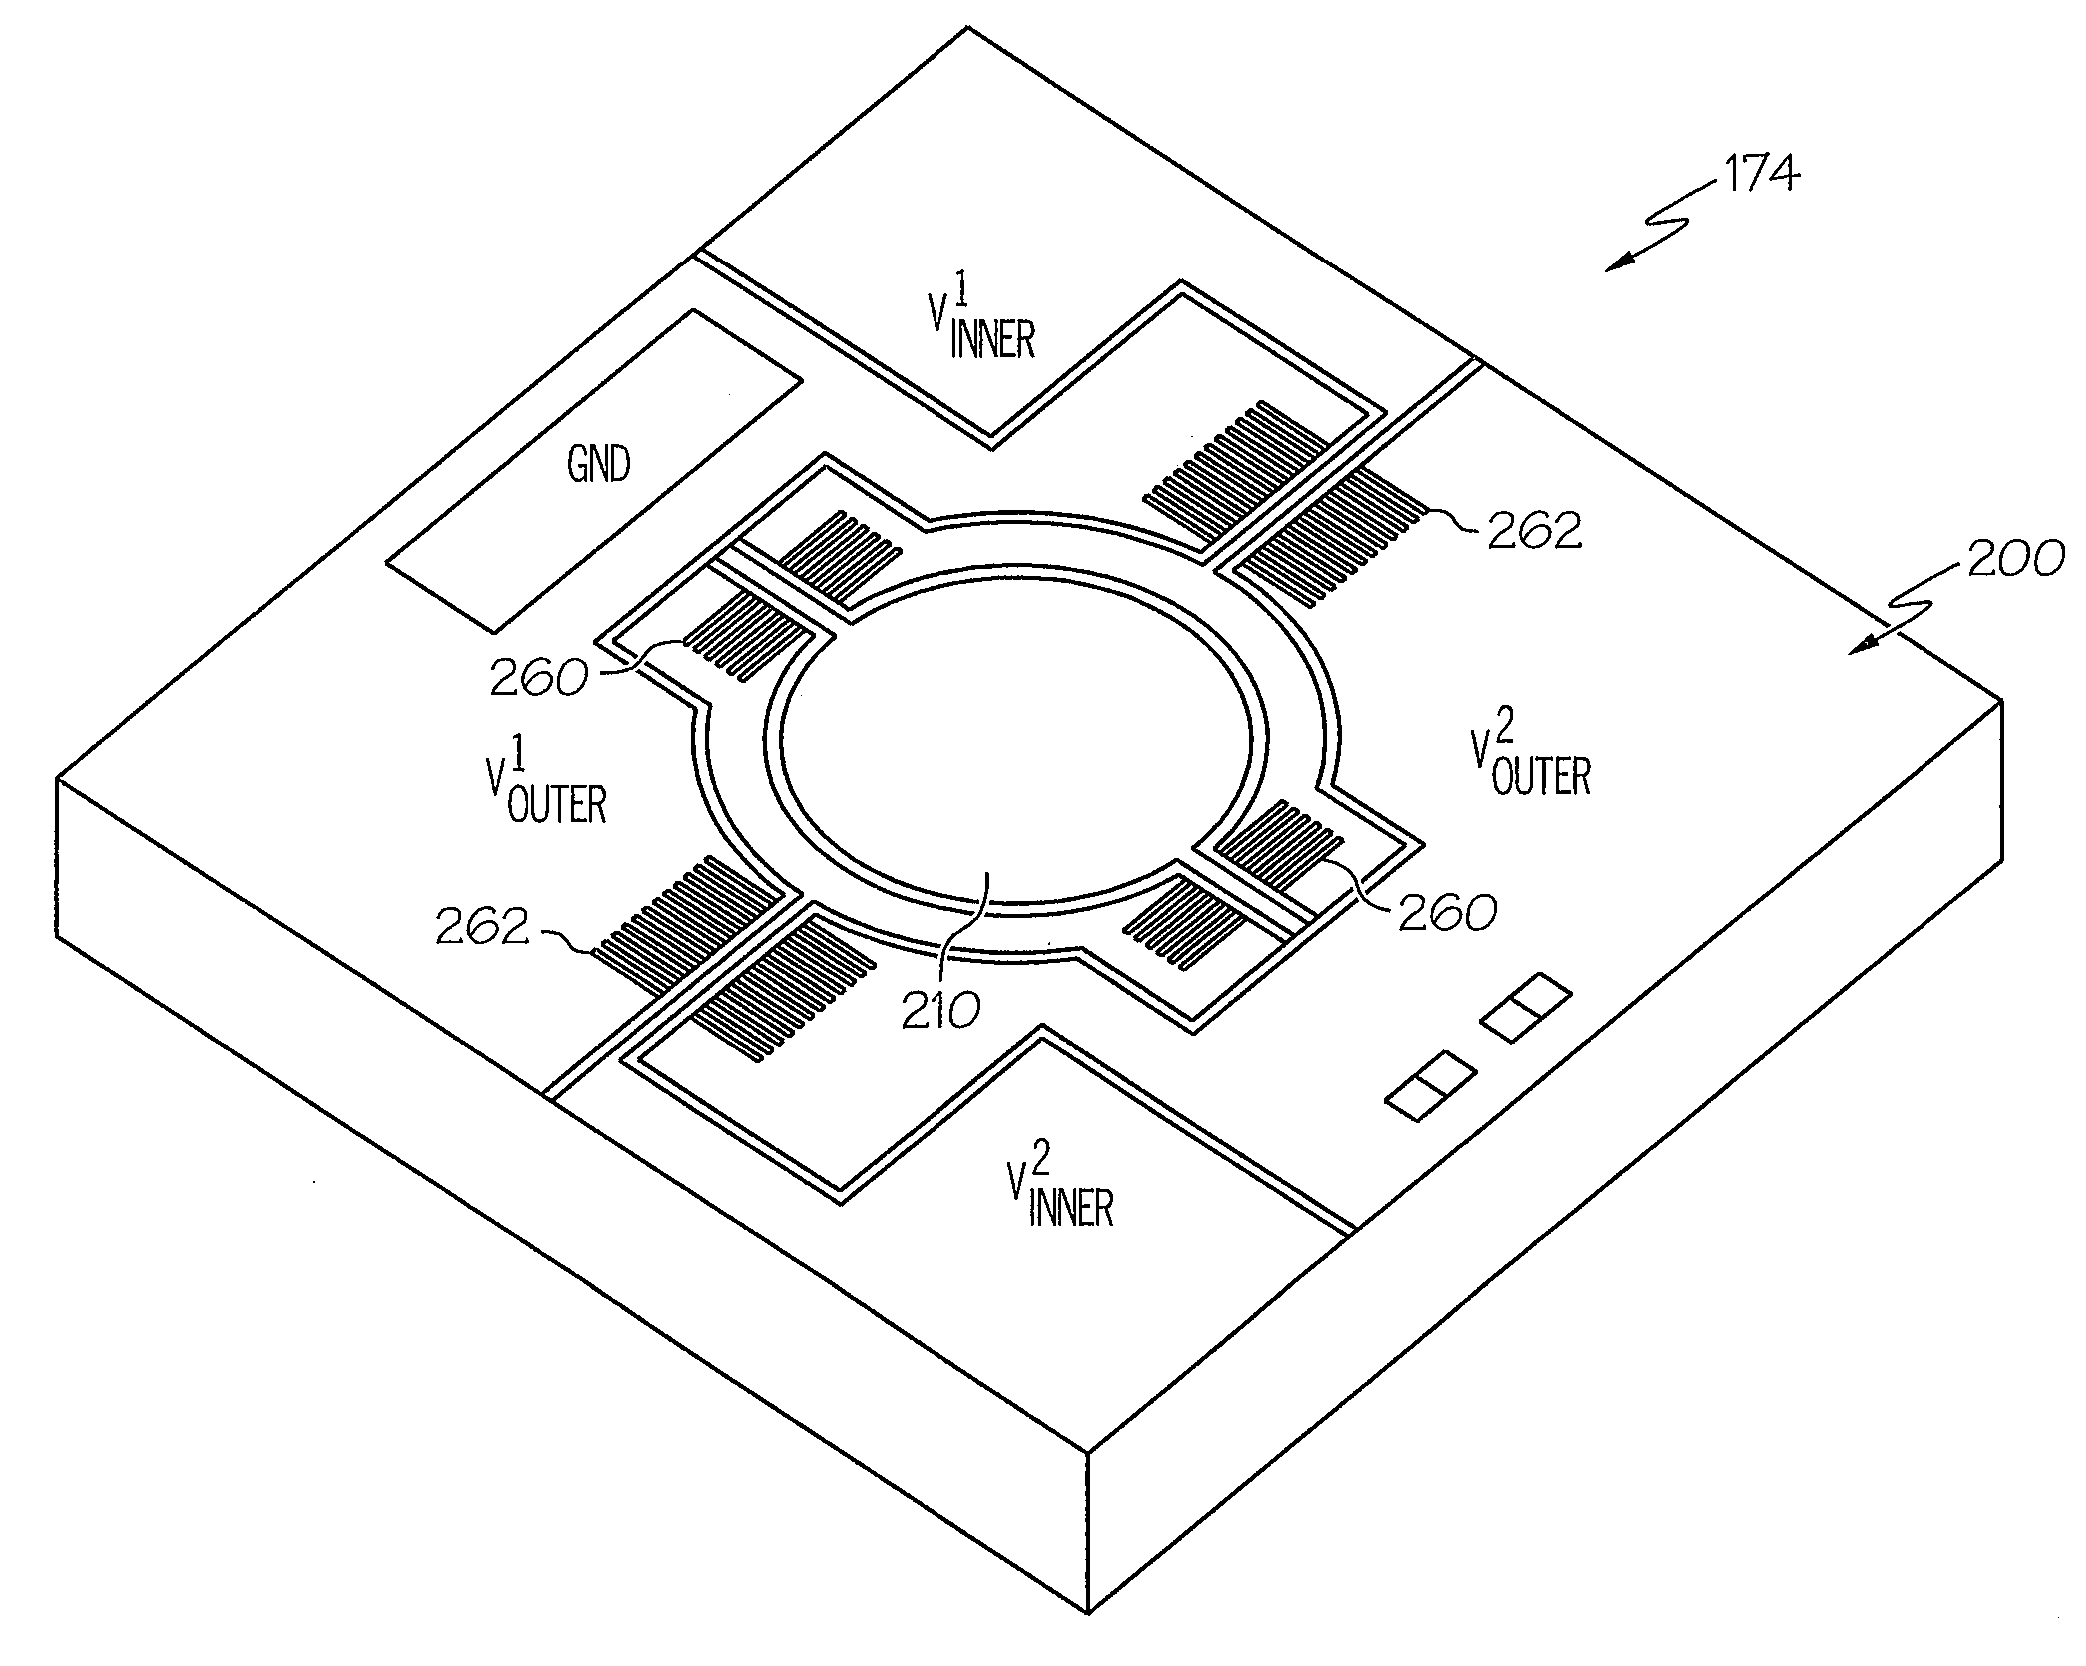 Method for Fabricating a Micromirror with Self-Aligned Actuators